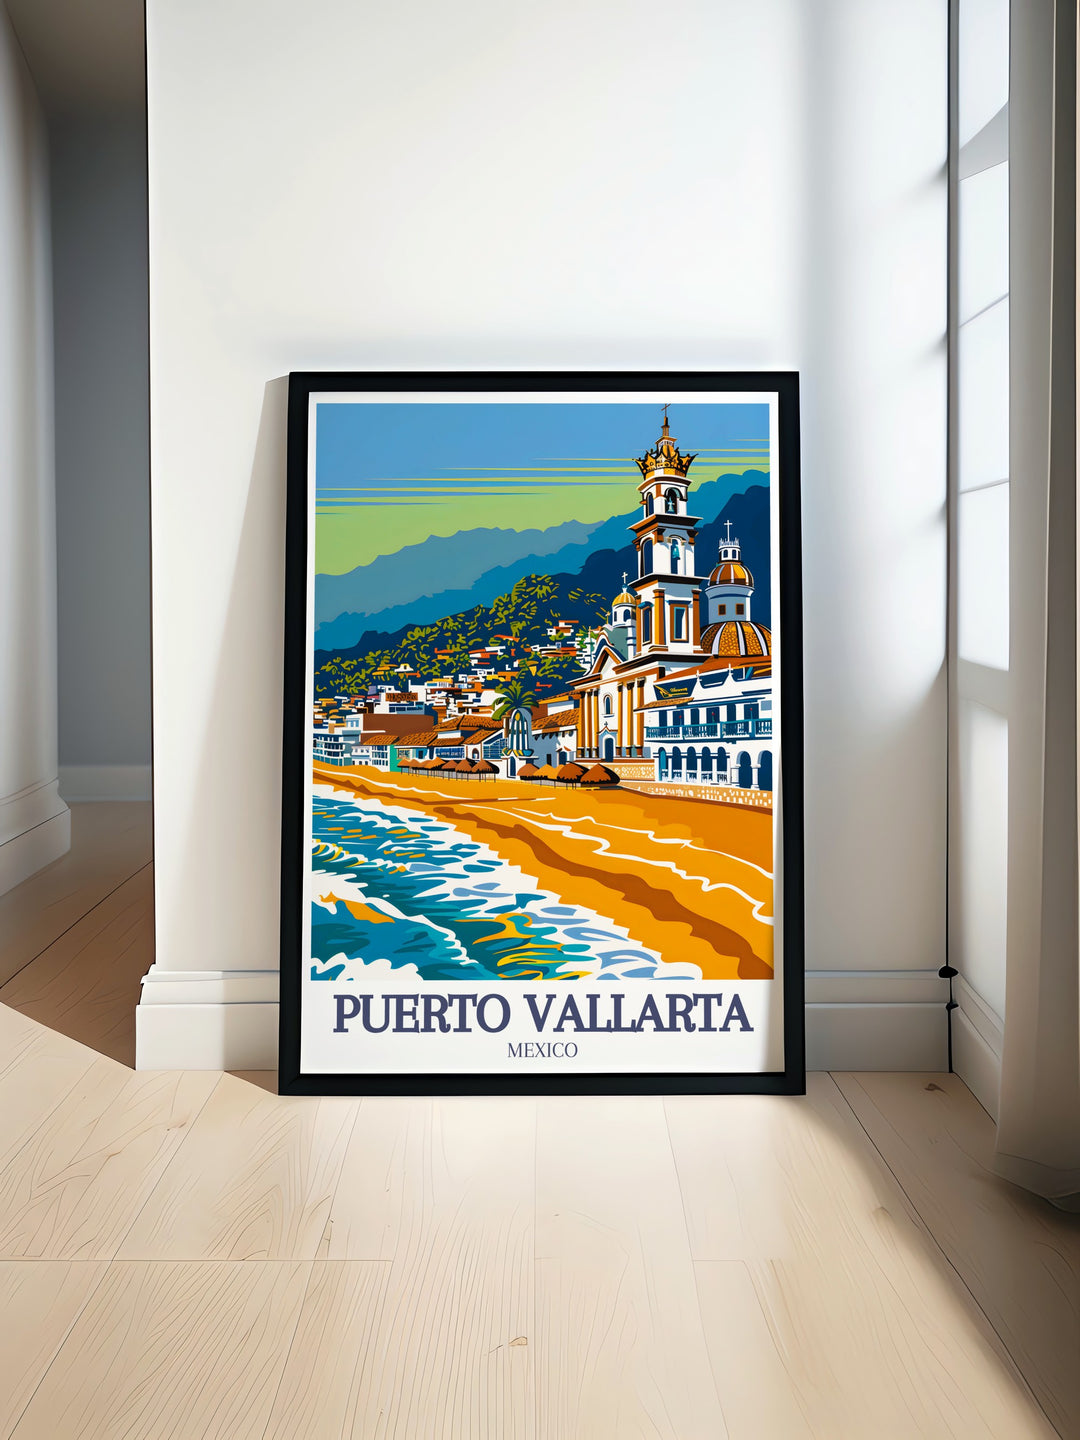 Puebla Print featuring vibrant city streets and colonial architecture perfect for adding cultural flair to any room includes Puerto Vallarta beach Our Lady of Guadalupe Church modern prints for a sophisticated touch